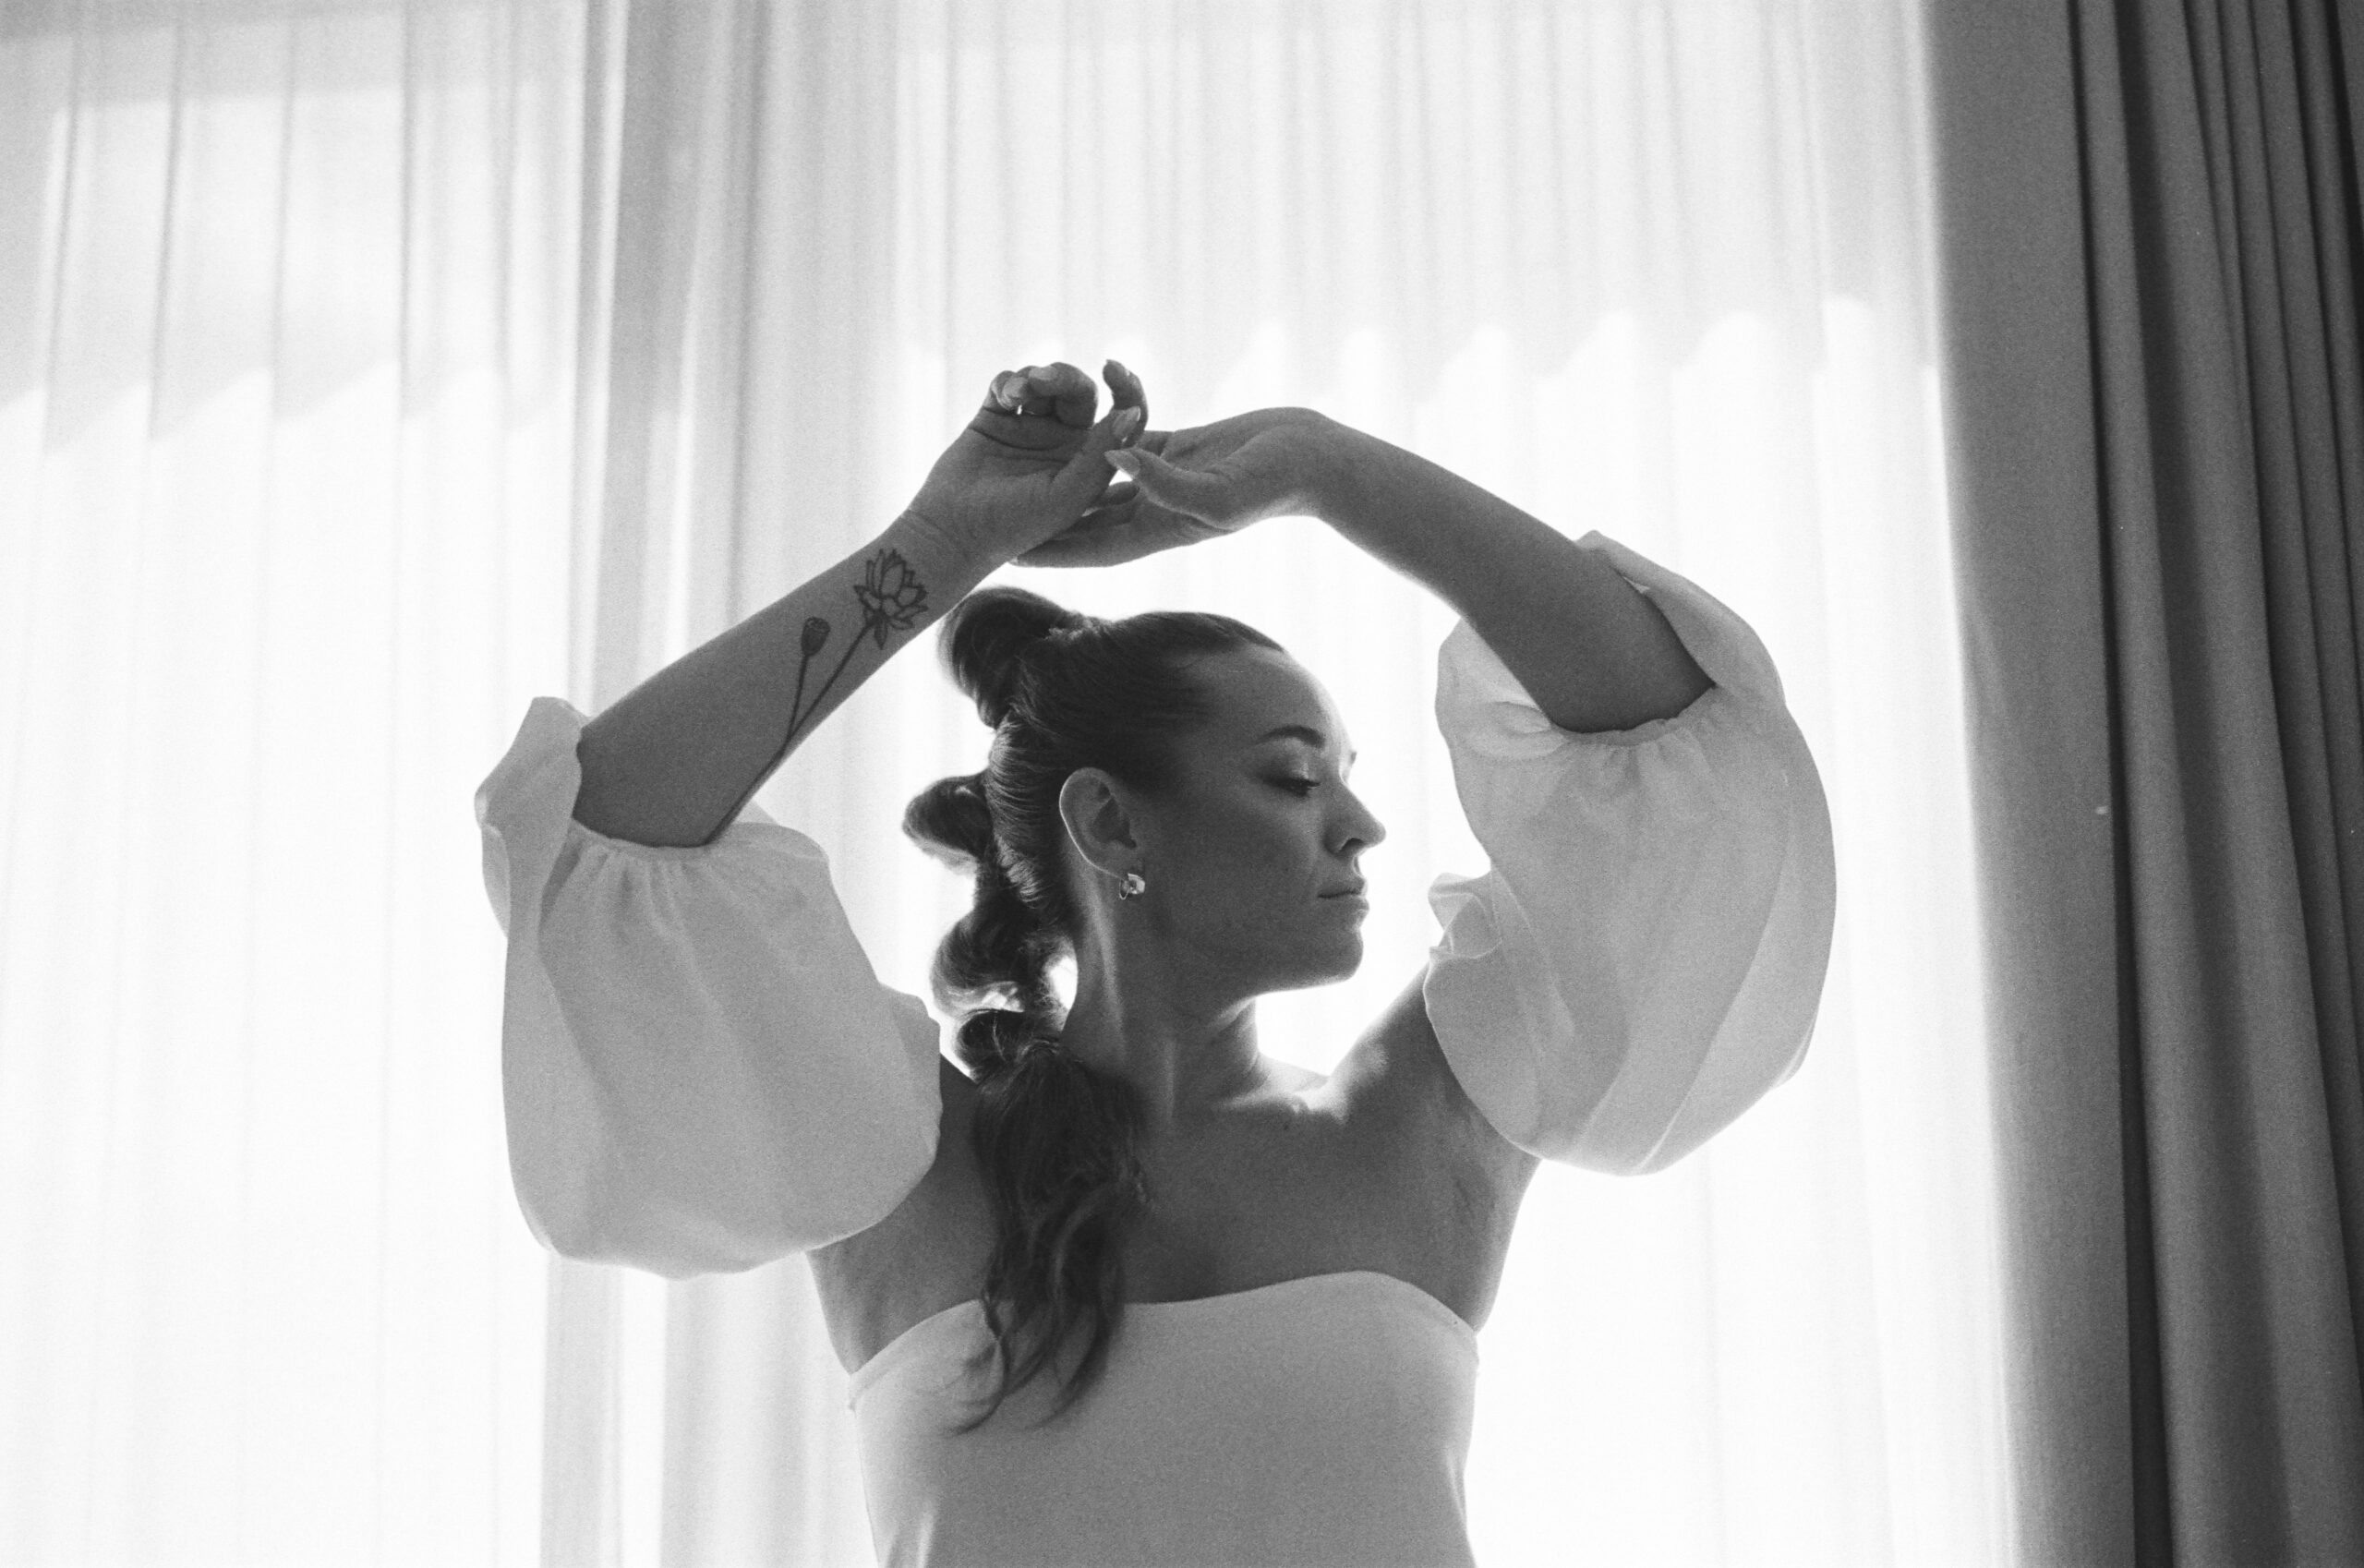 black and white photo of bride with arms in the air floral tattoo artsy wedding portrait verona gown kamperett in front of backlit window mohawk high bubble ponytail hairstyle unique wedding hair edgy wedding hair